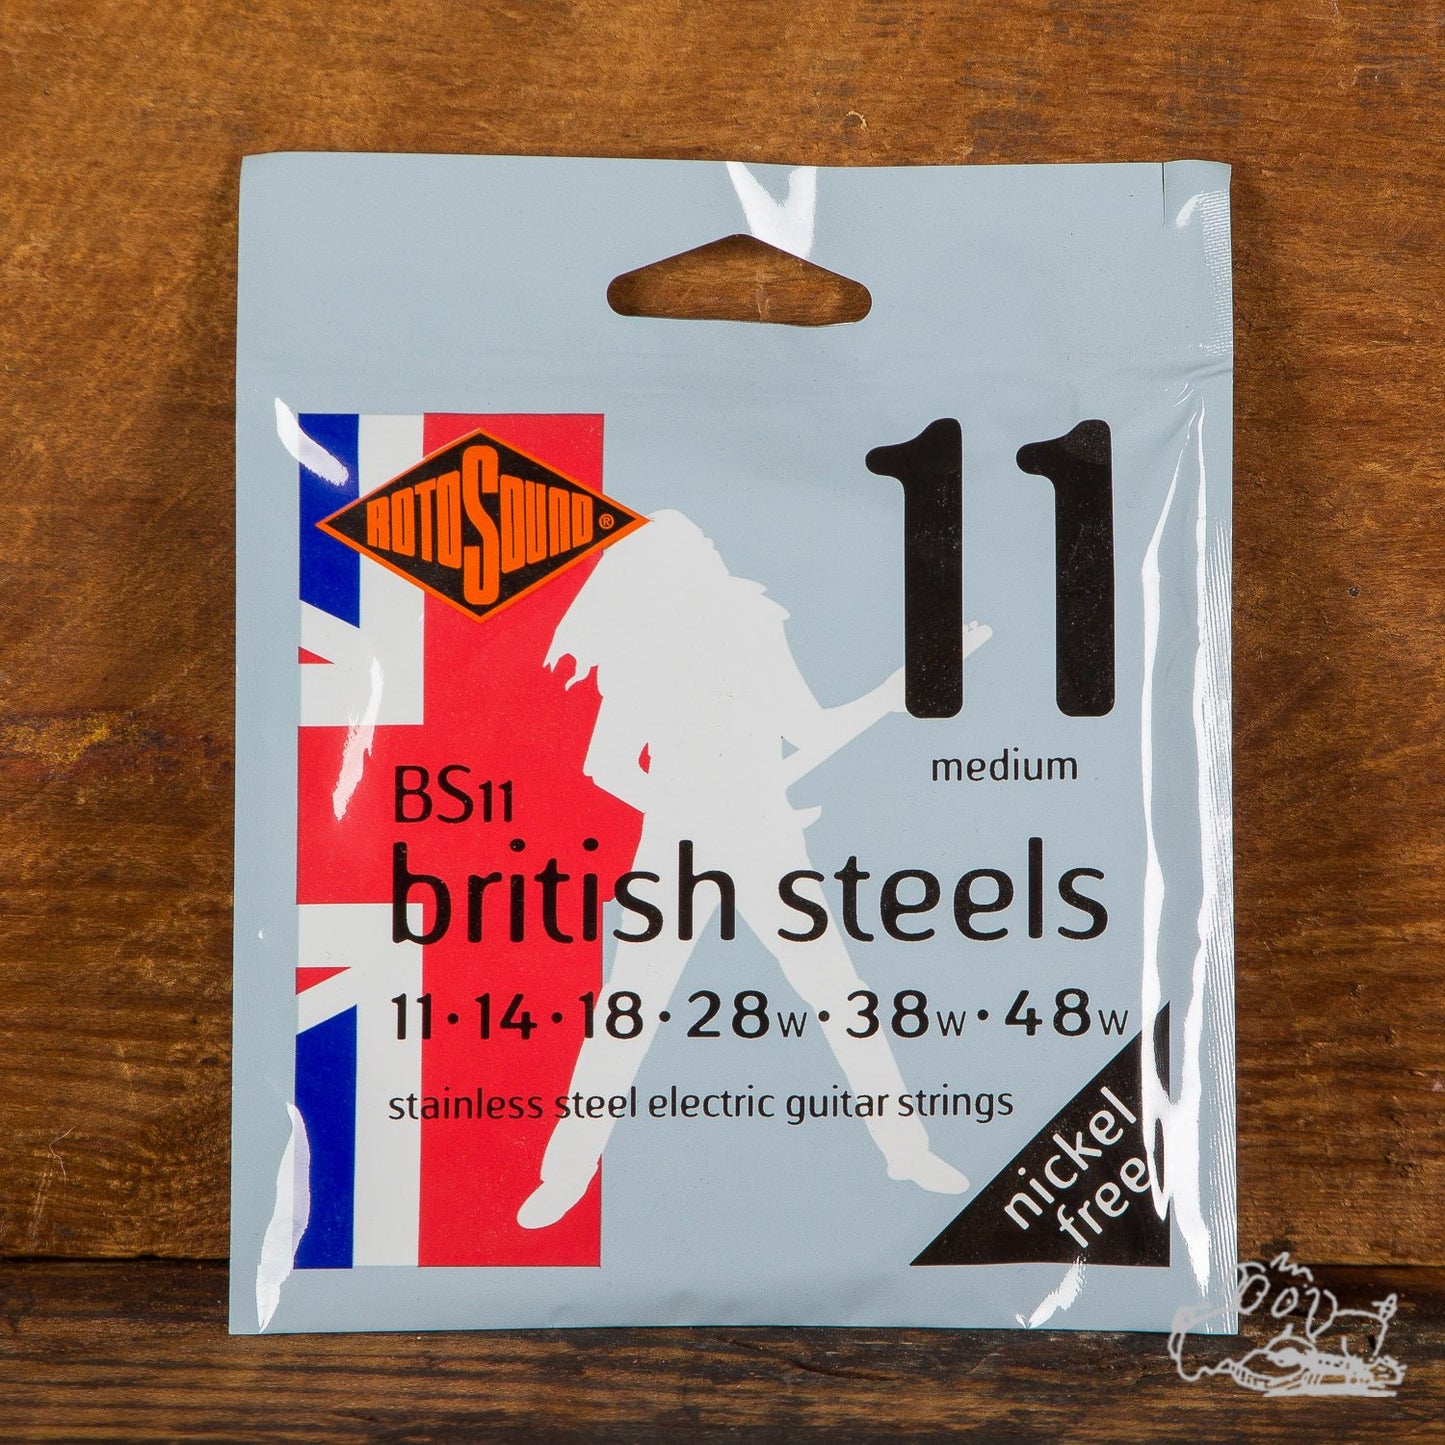 Rotosound British Steel Stainless Steel Electric Guitar Strings 9s, 10s, and 11s